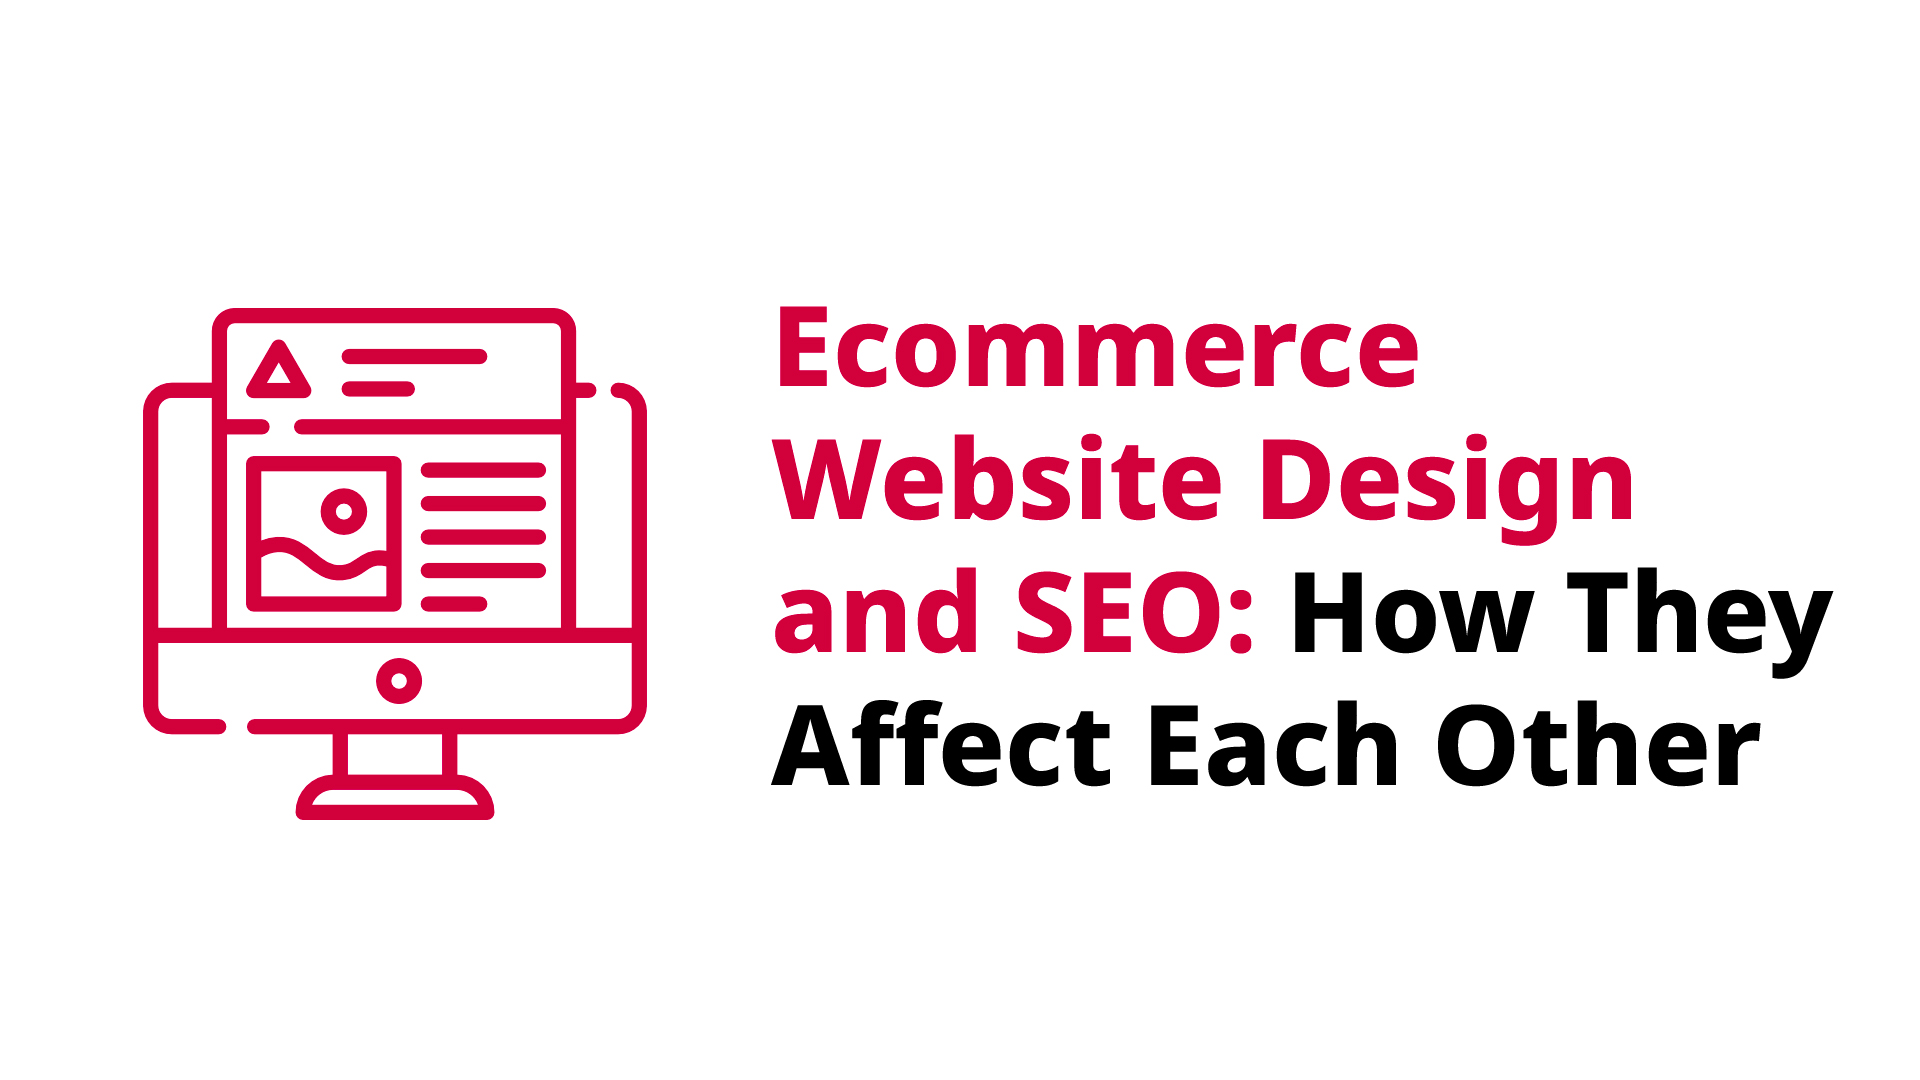 Ecommerce Website Design and SEO: How They Affect Each Other